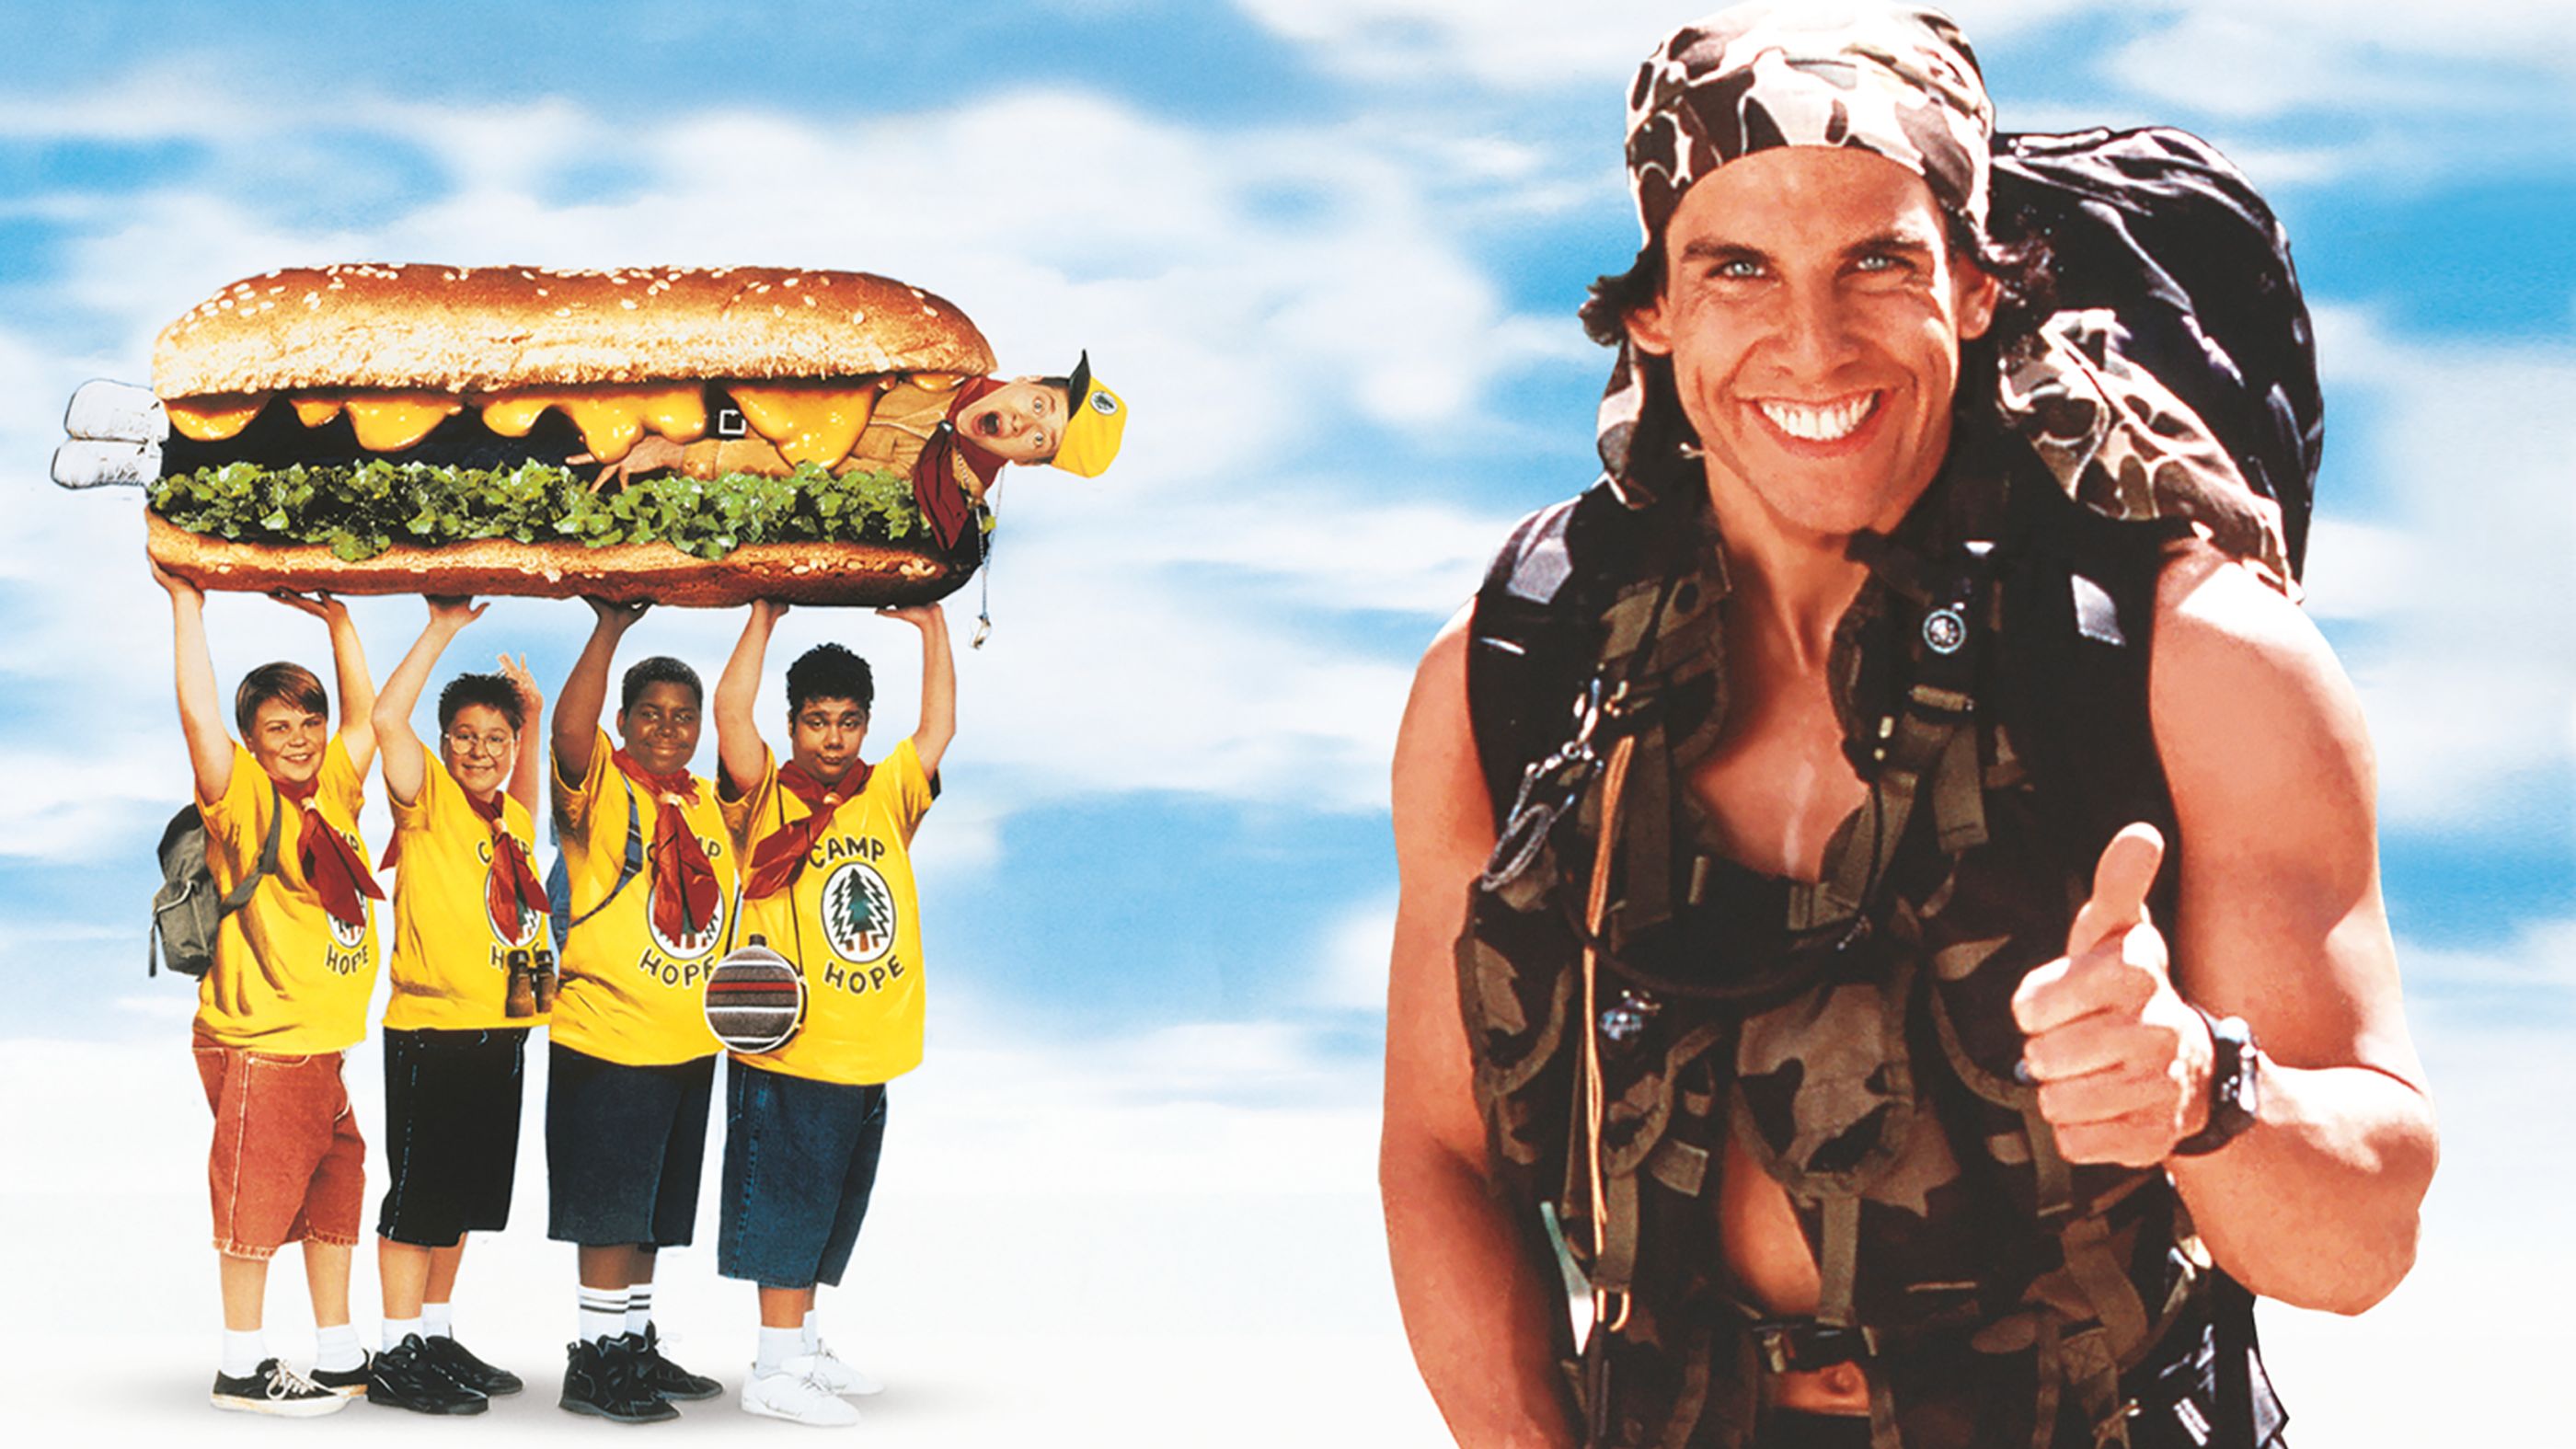 Heavyweights - Movie Review - The Austin Chronicle